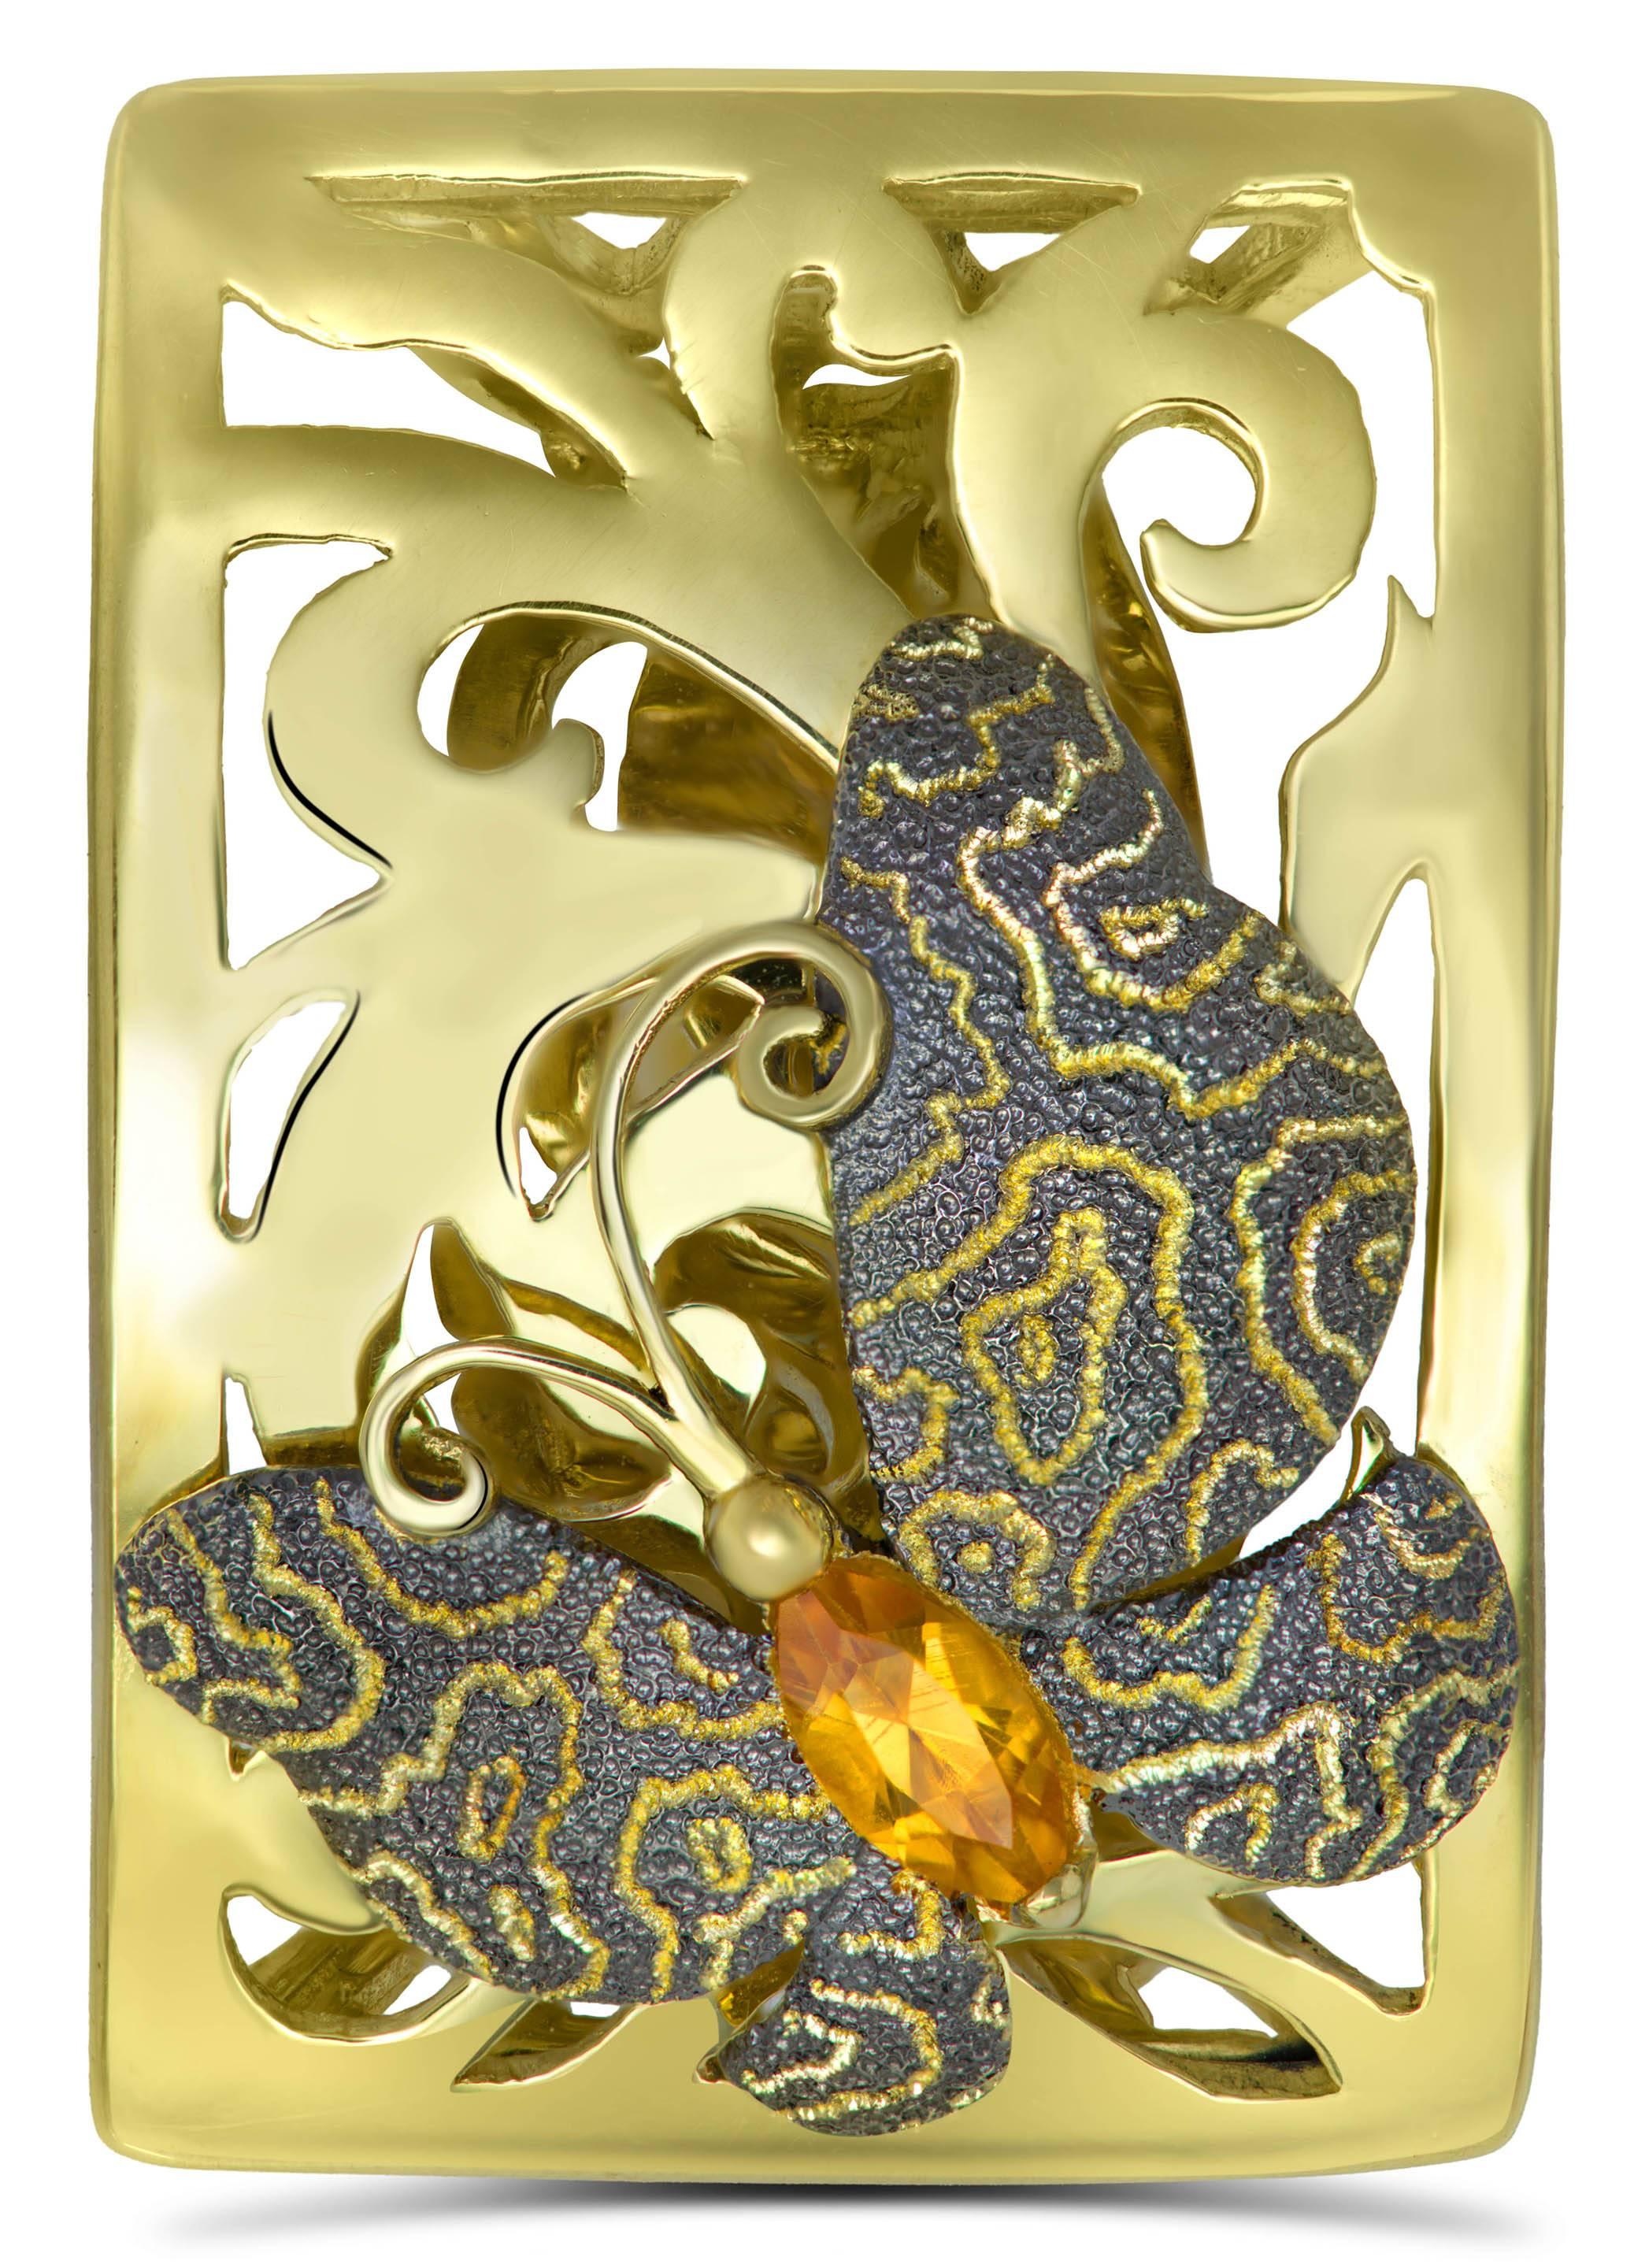 Alex Soldier's Butterfly collection is dedicated to celebration of life. Butterflies remind us to enjoy the moment and embrace change. Made in 18 karat yellow gold with honey citrine (0.3 ct), this lovely butterfly ring is finished with Alex